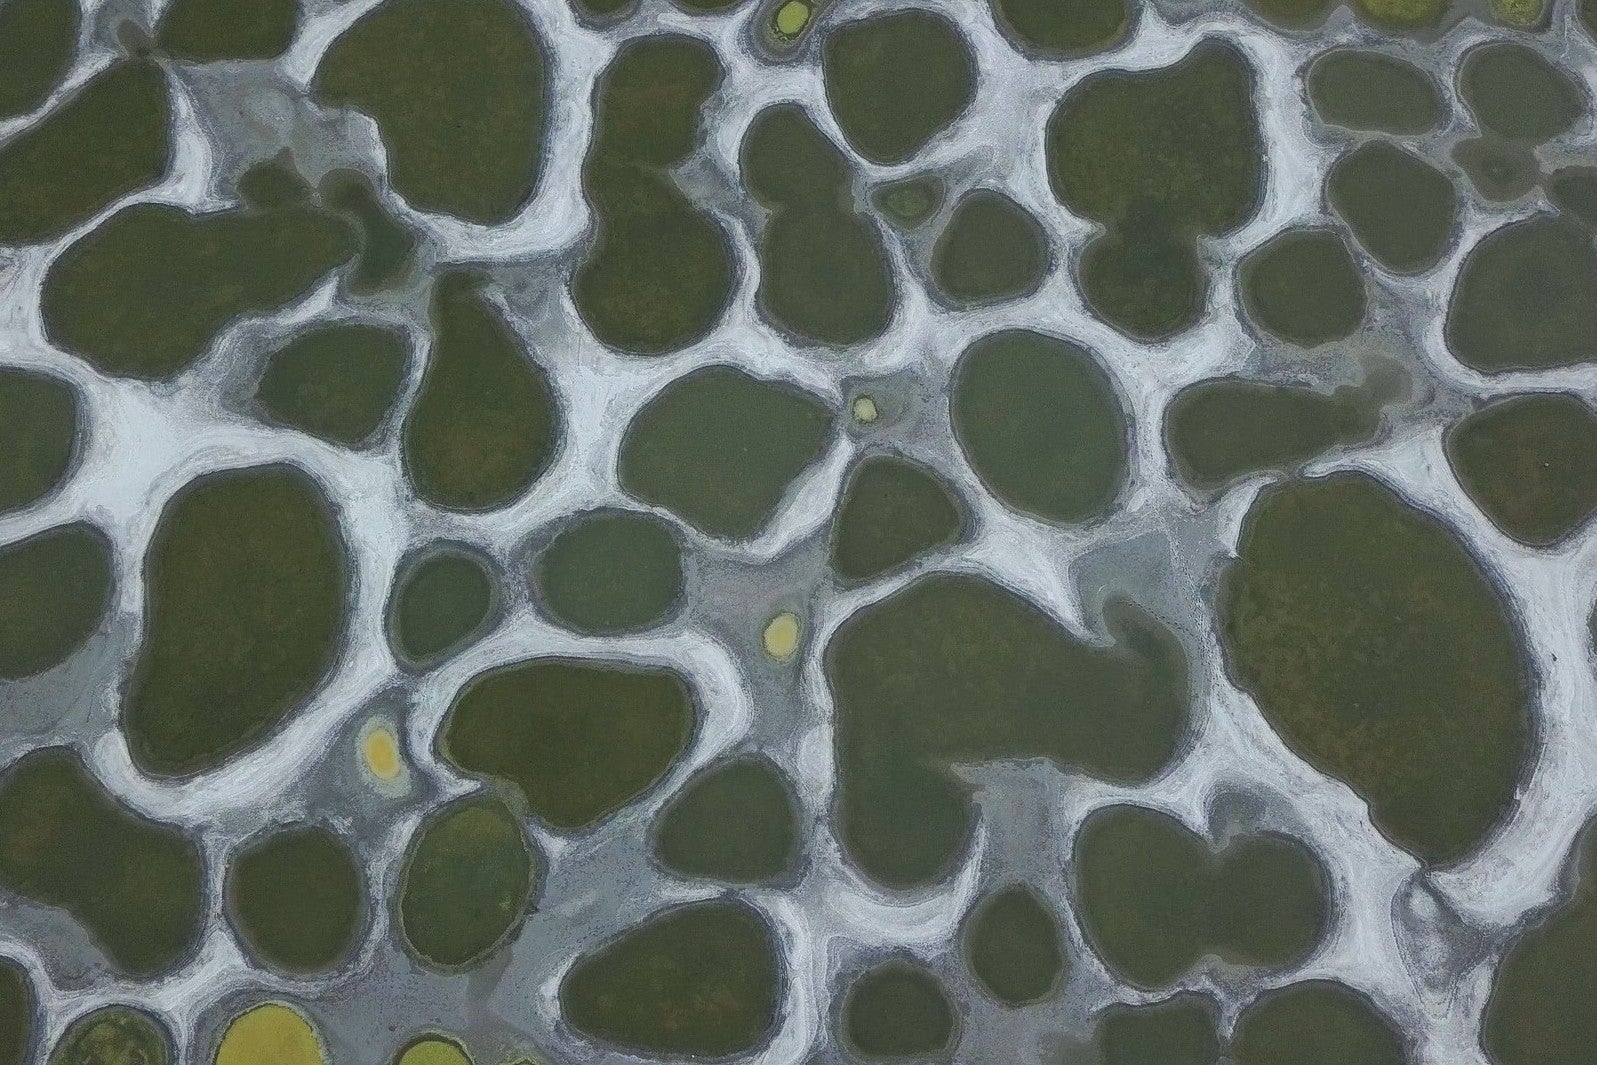 Canada's Spotted Lake is the ultimate lunar landscape